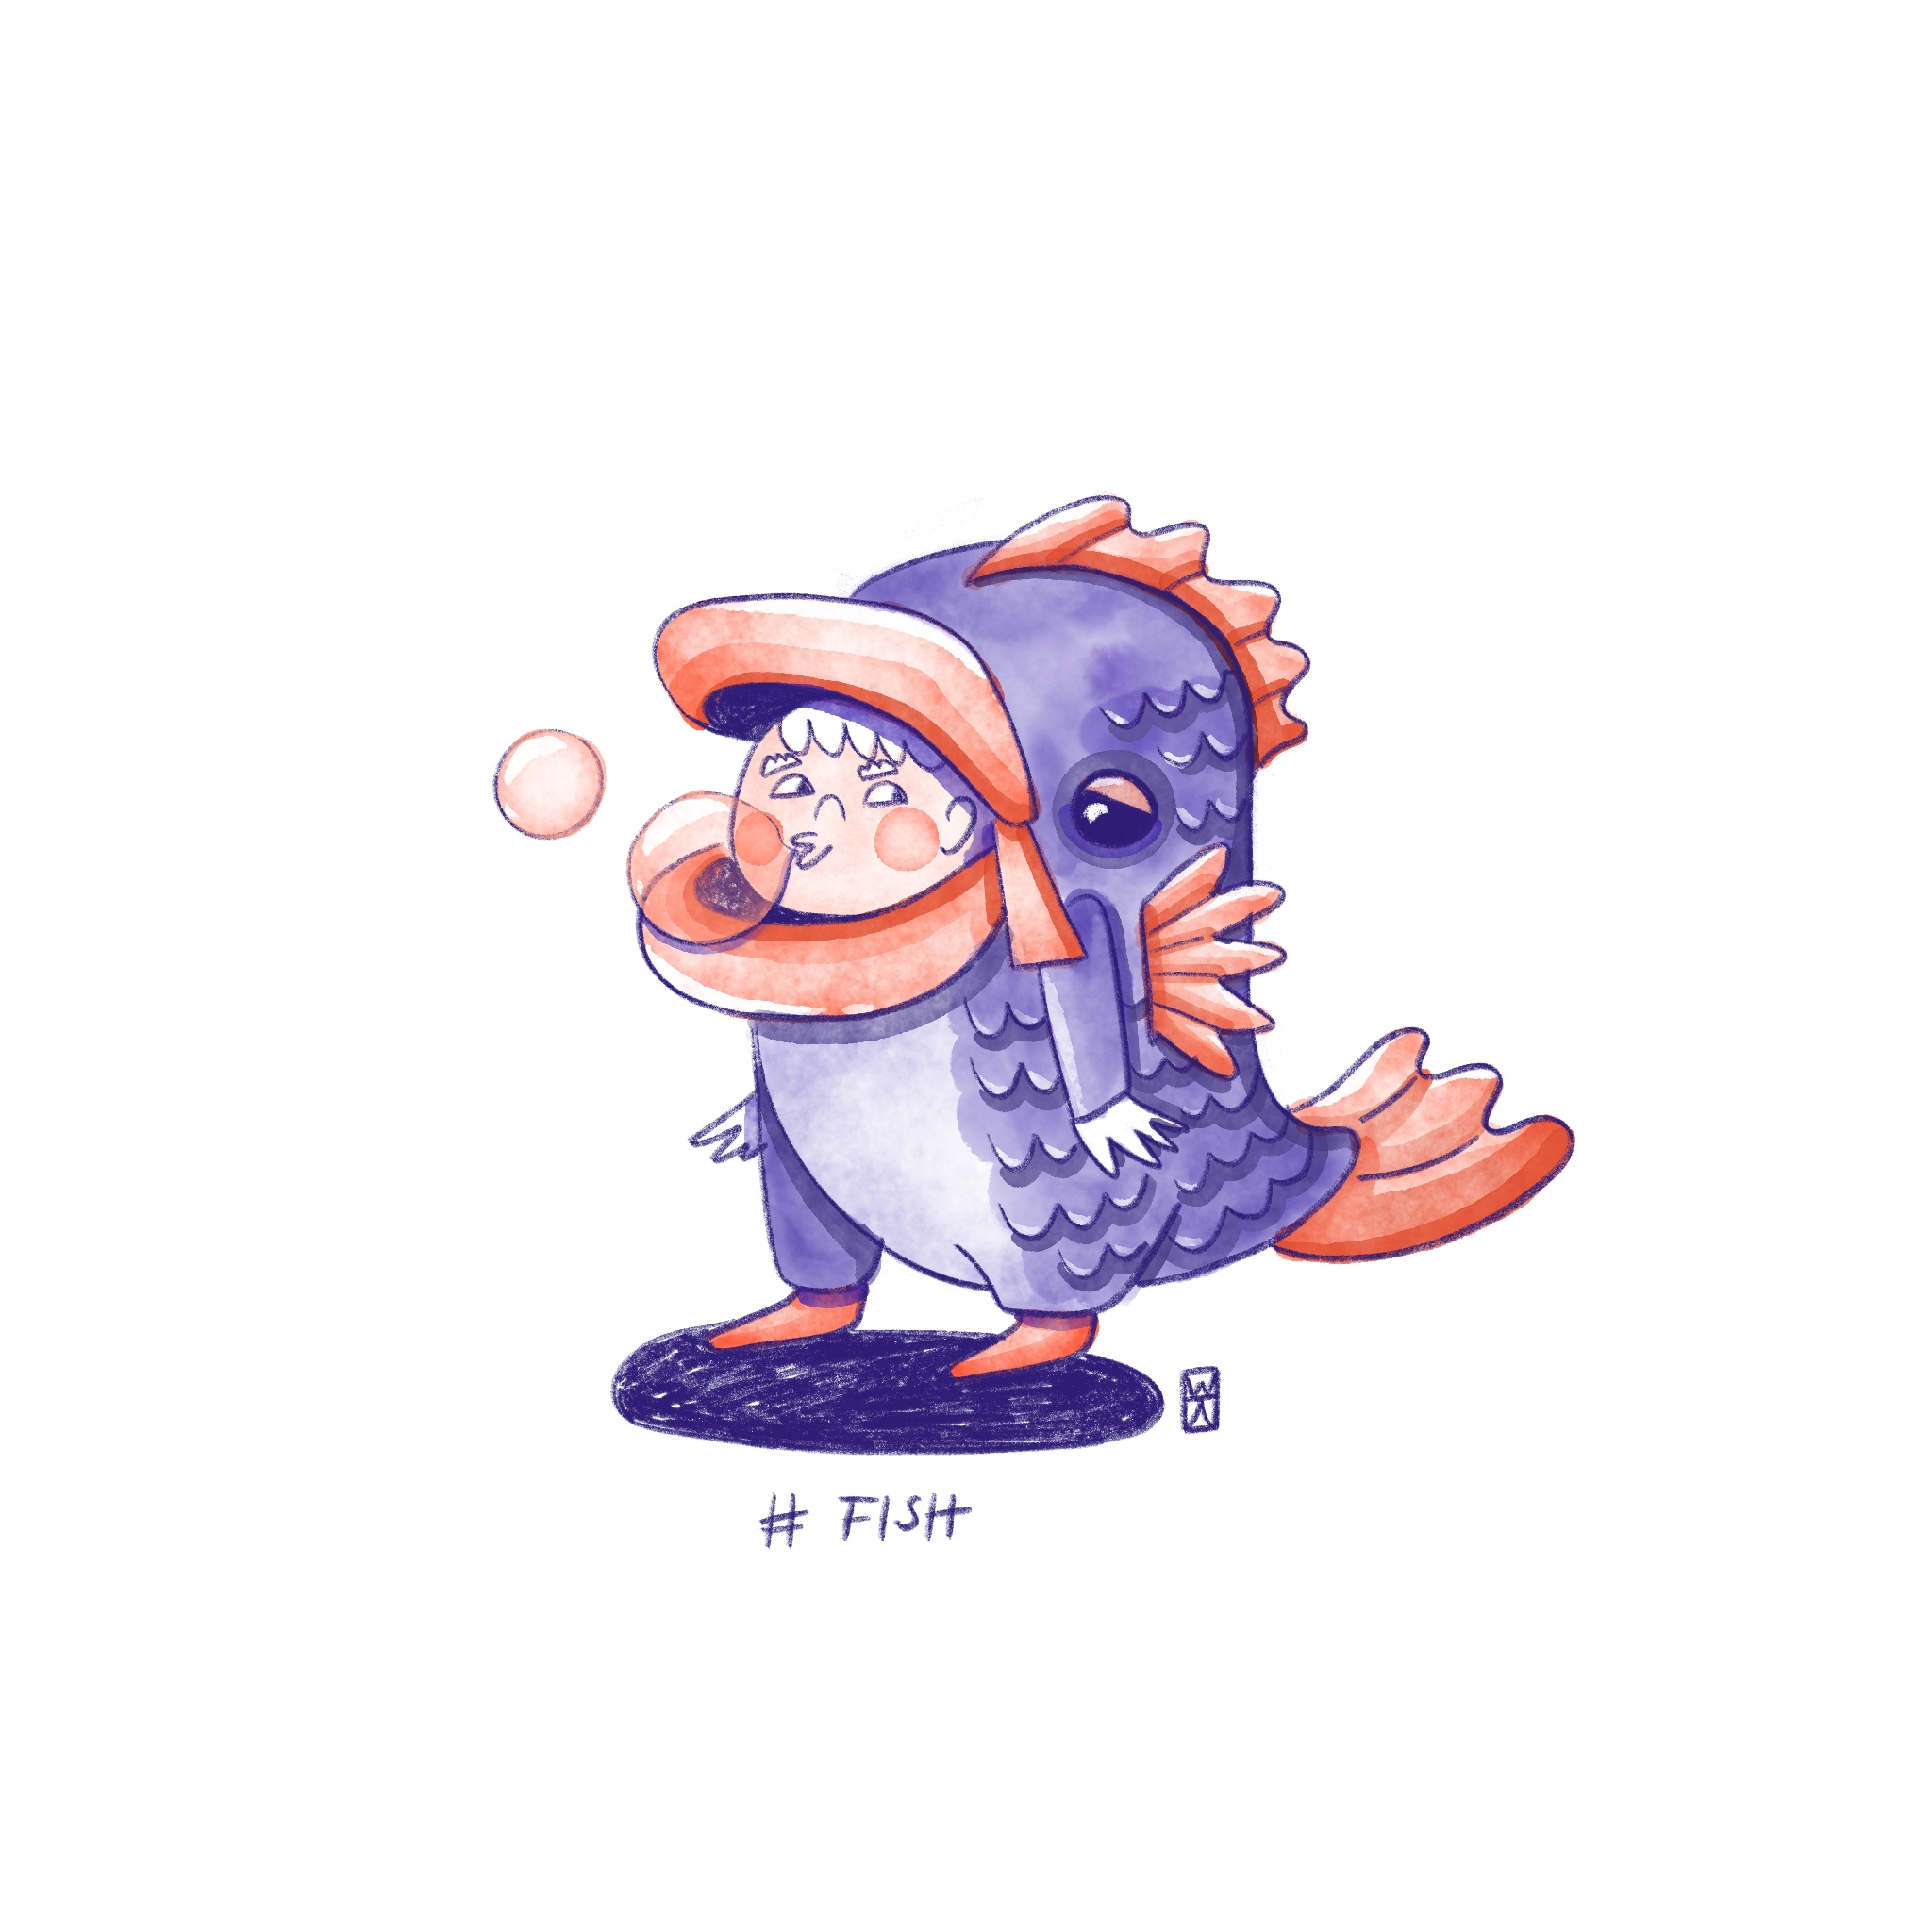 a little guy in a fish costume